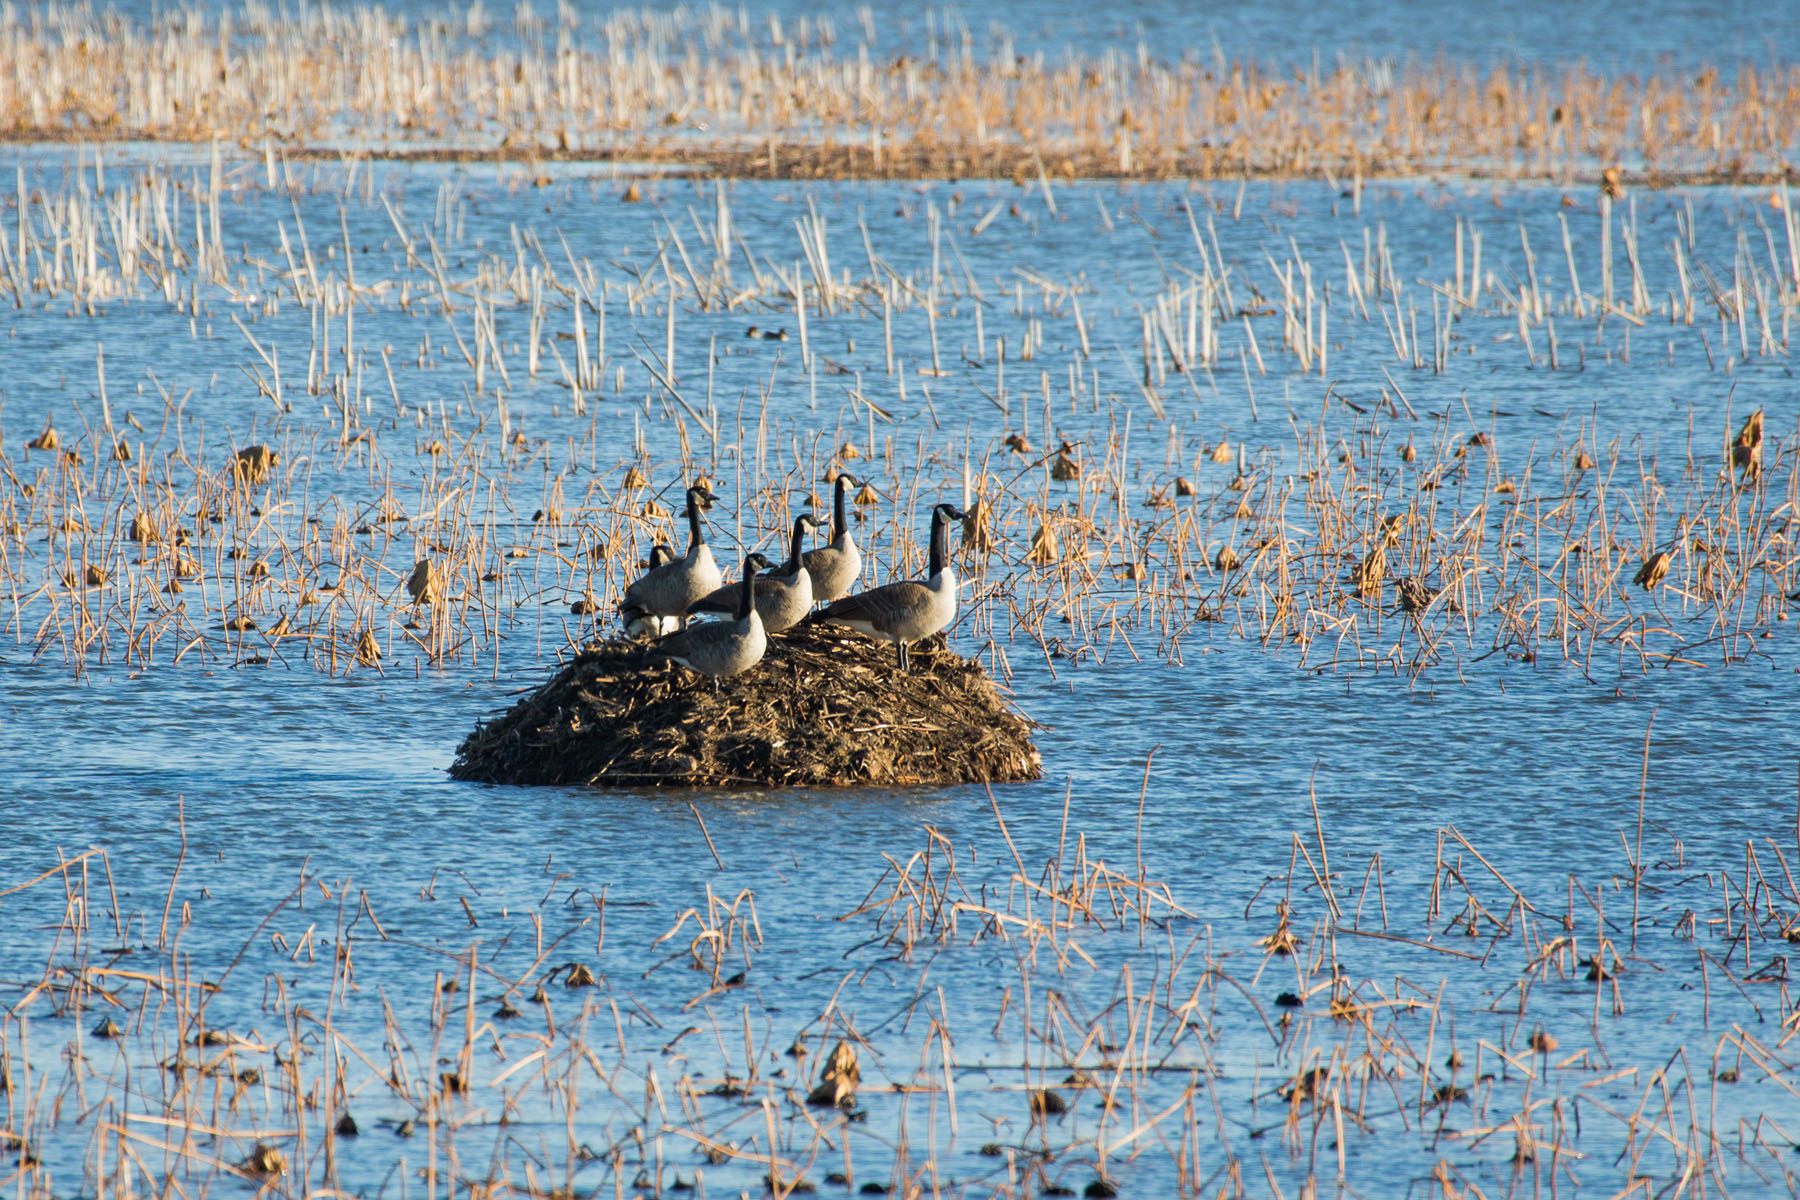 Canada geese on muskrat hut, Loess Bluffs NWR, Missouri.  Click for next photo.